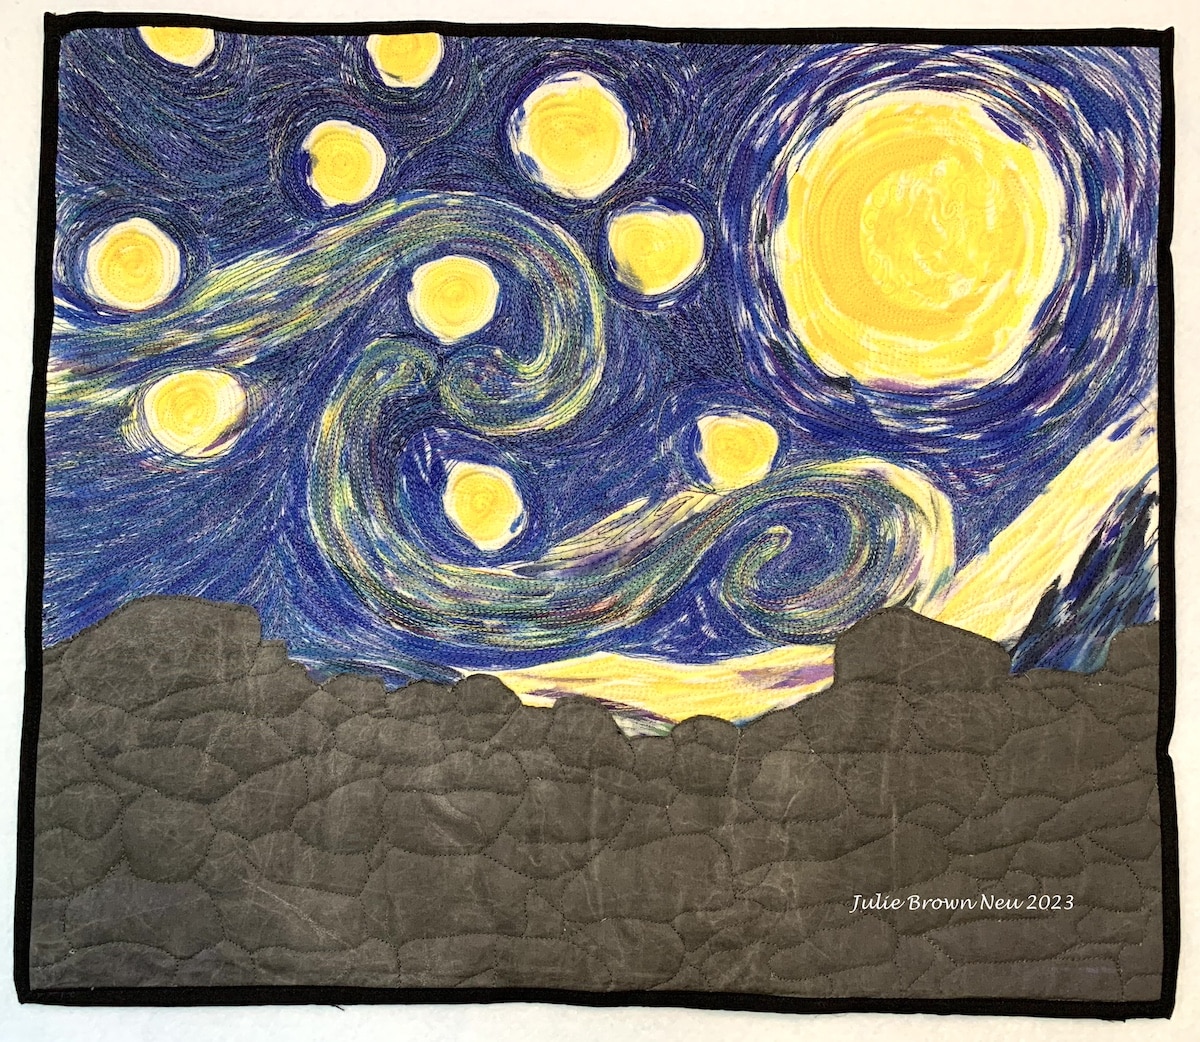 Recreation Van Gogh's Starry Night using thread painting with stone wall in foreground